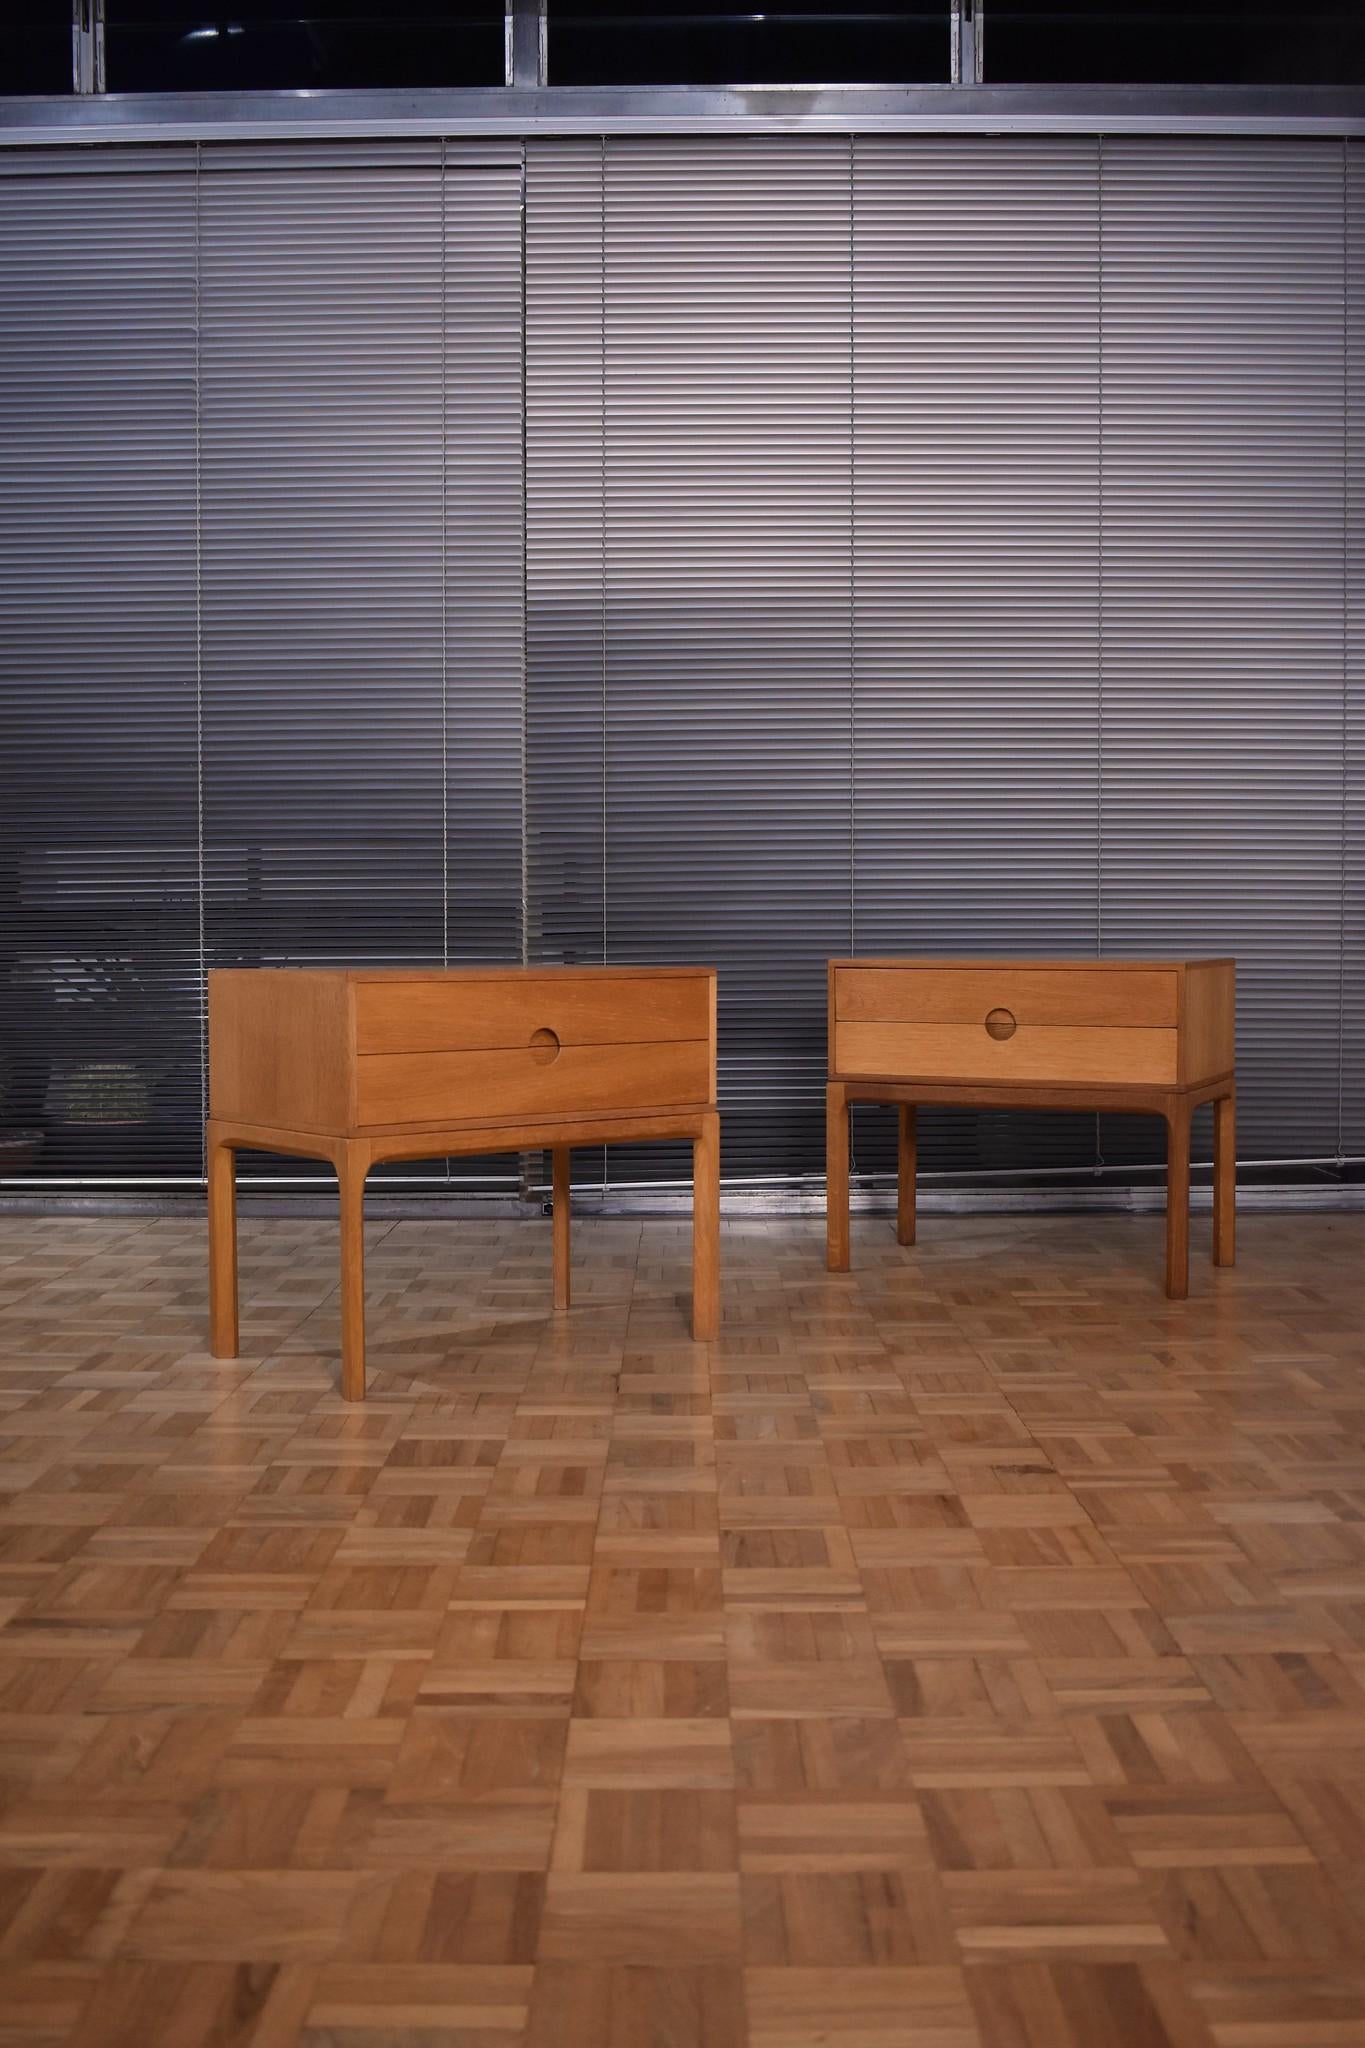 Produced by Aksel Kjersgaard for circa 10 years between the mid-1950s to mid-1960s the range of low chest of drawers designed by Kai Kristiansen has rightly become a Danish design Classic.

Very sought after this is a hard to find pair of oak